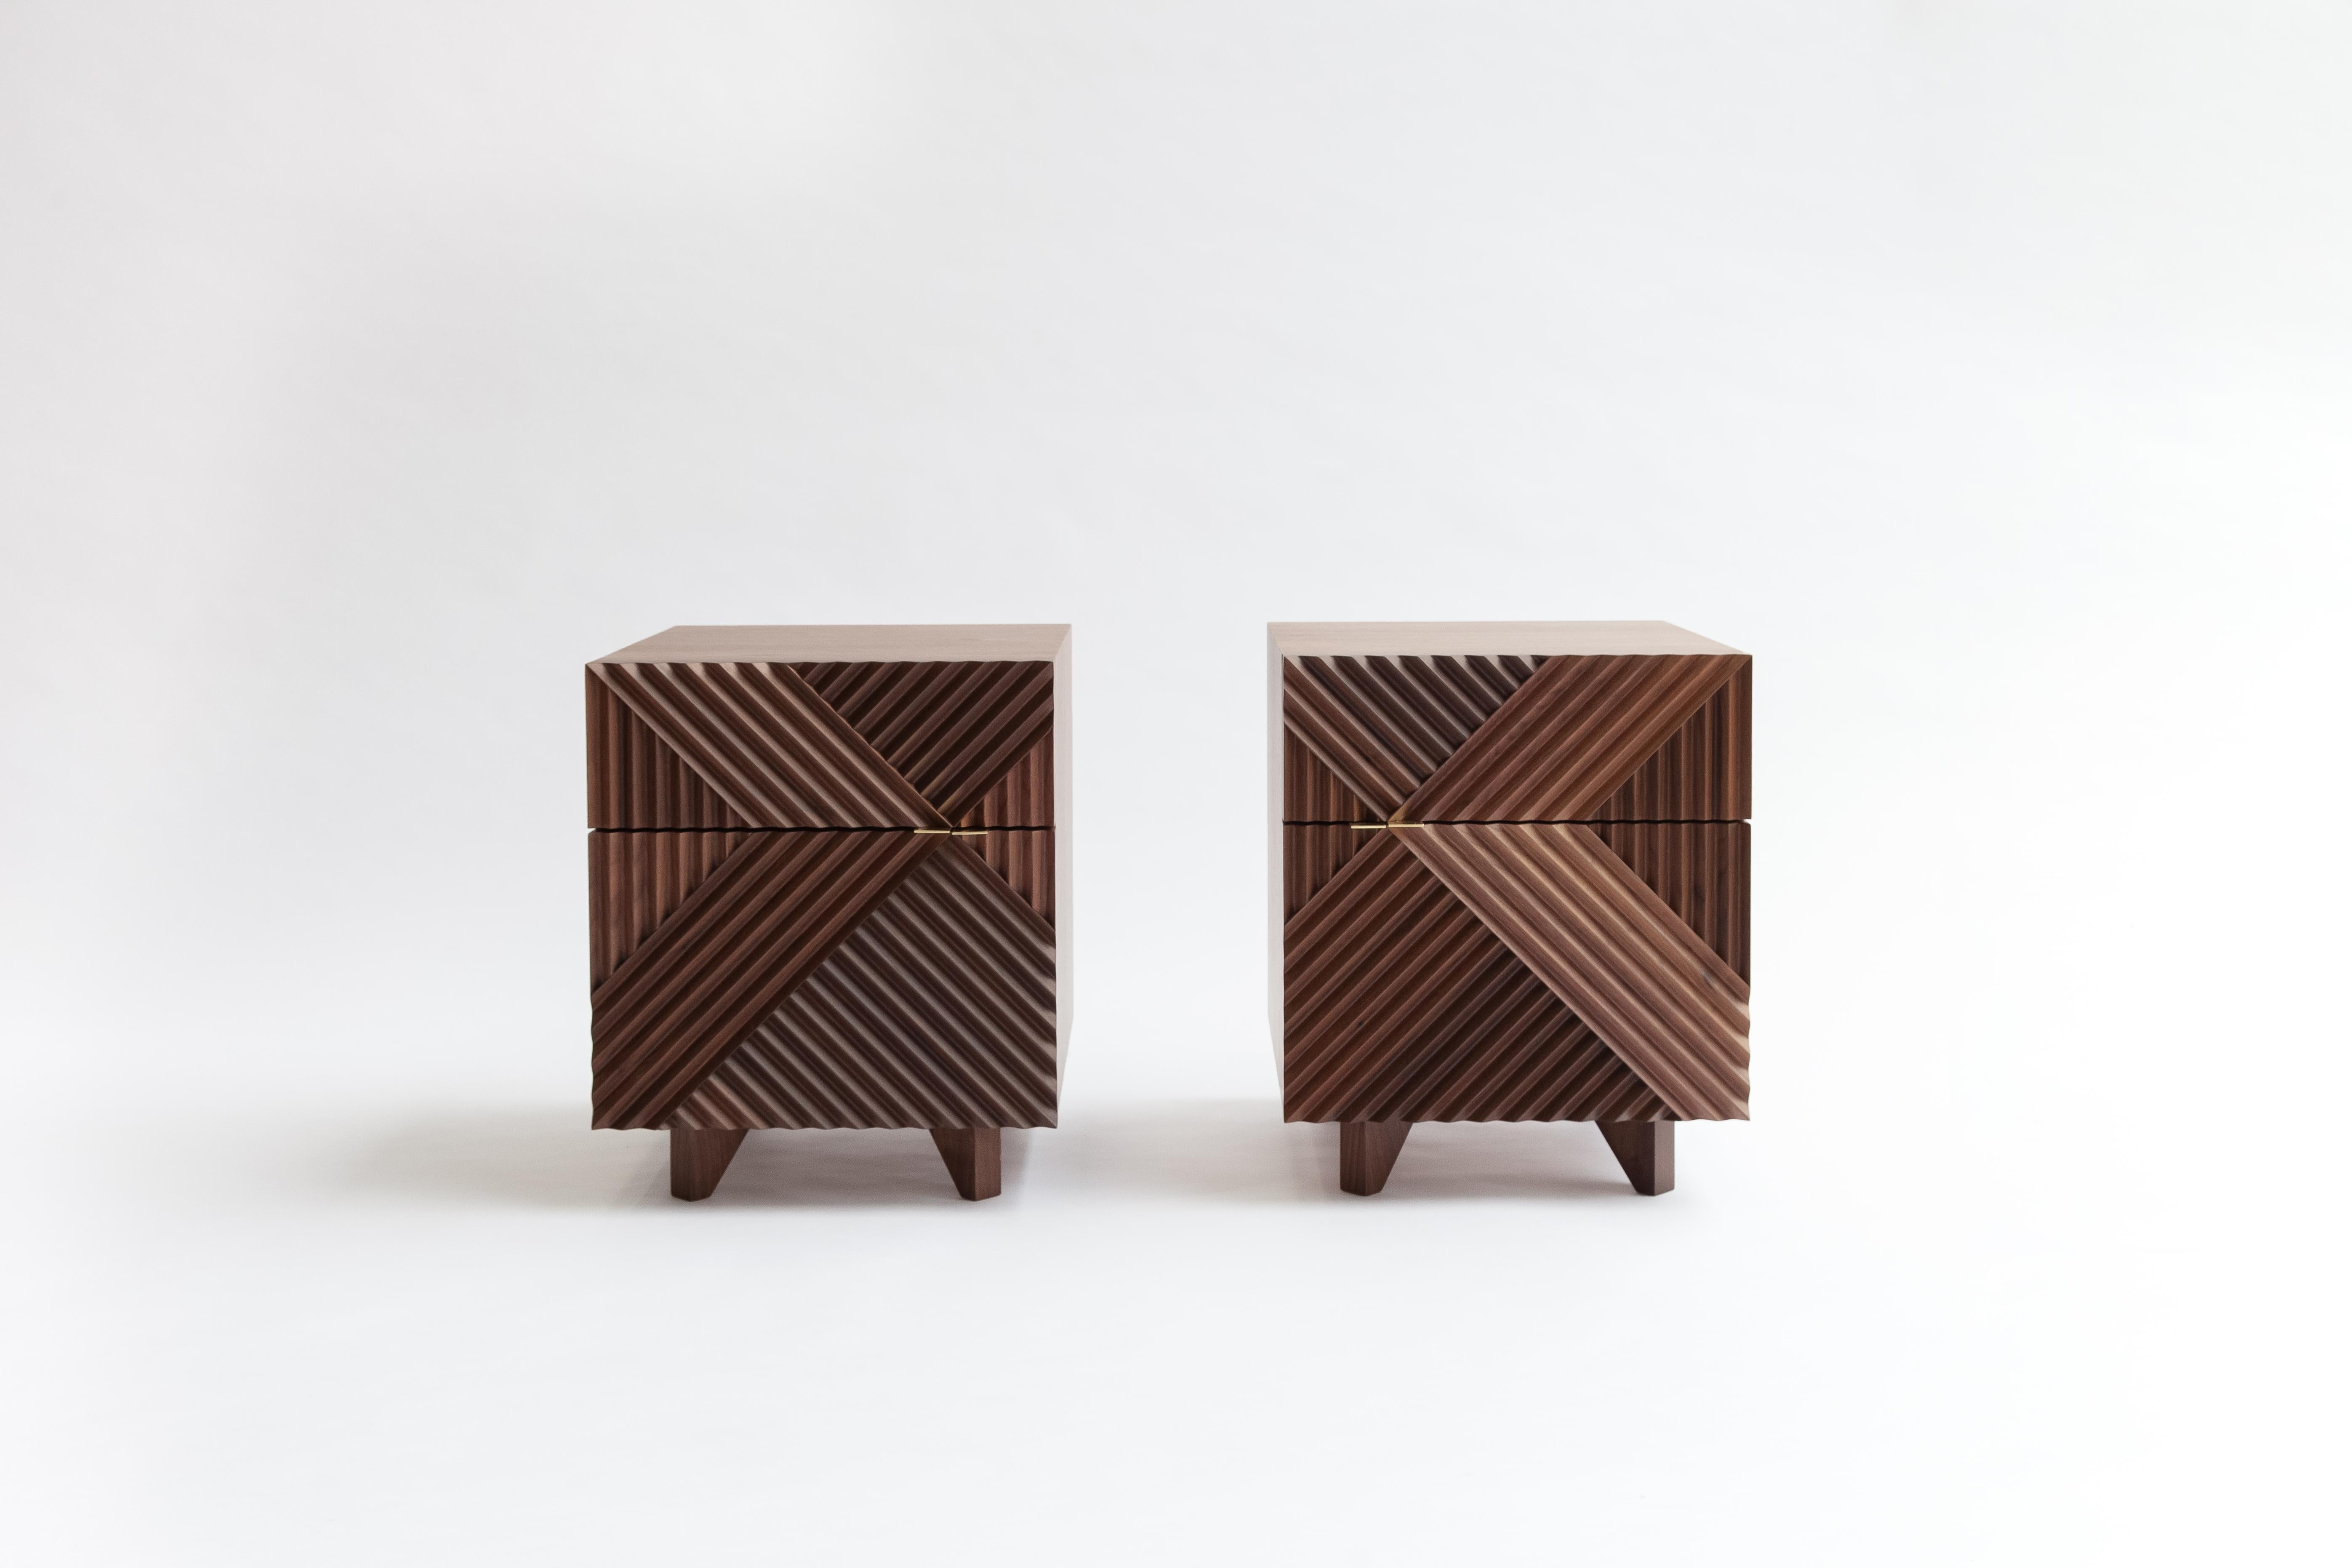 Set of 2 Enzo side table by Rosanna Ceravolo
Dimensions: W 40.2 x D 43 x H 48 cm
Materials: Solid american walnut fronts, polished brass handles, polyurethane spray finish.
Also available in different dimensions and materials.


Rosanna